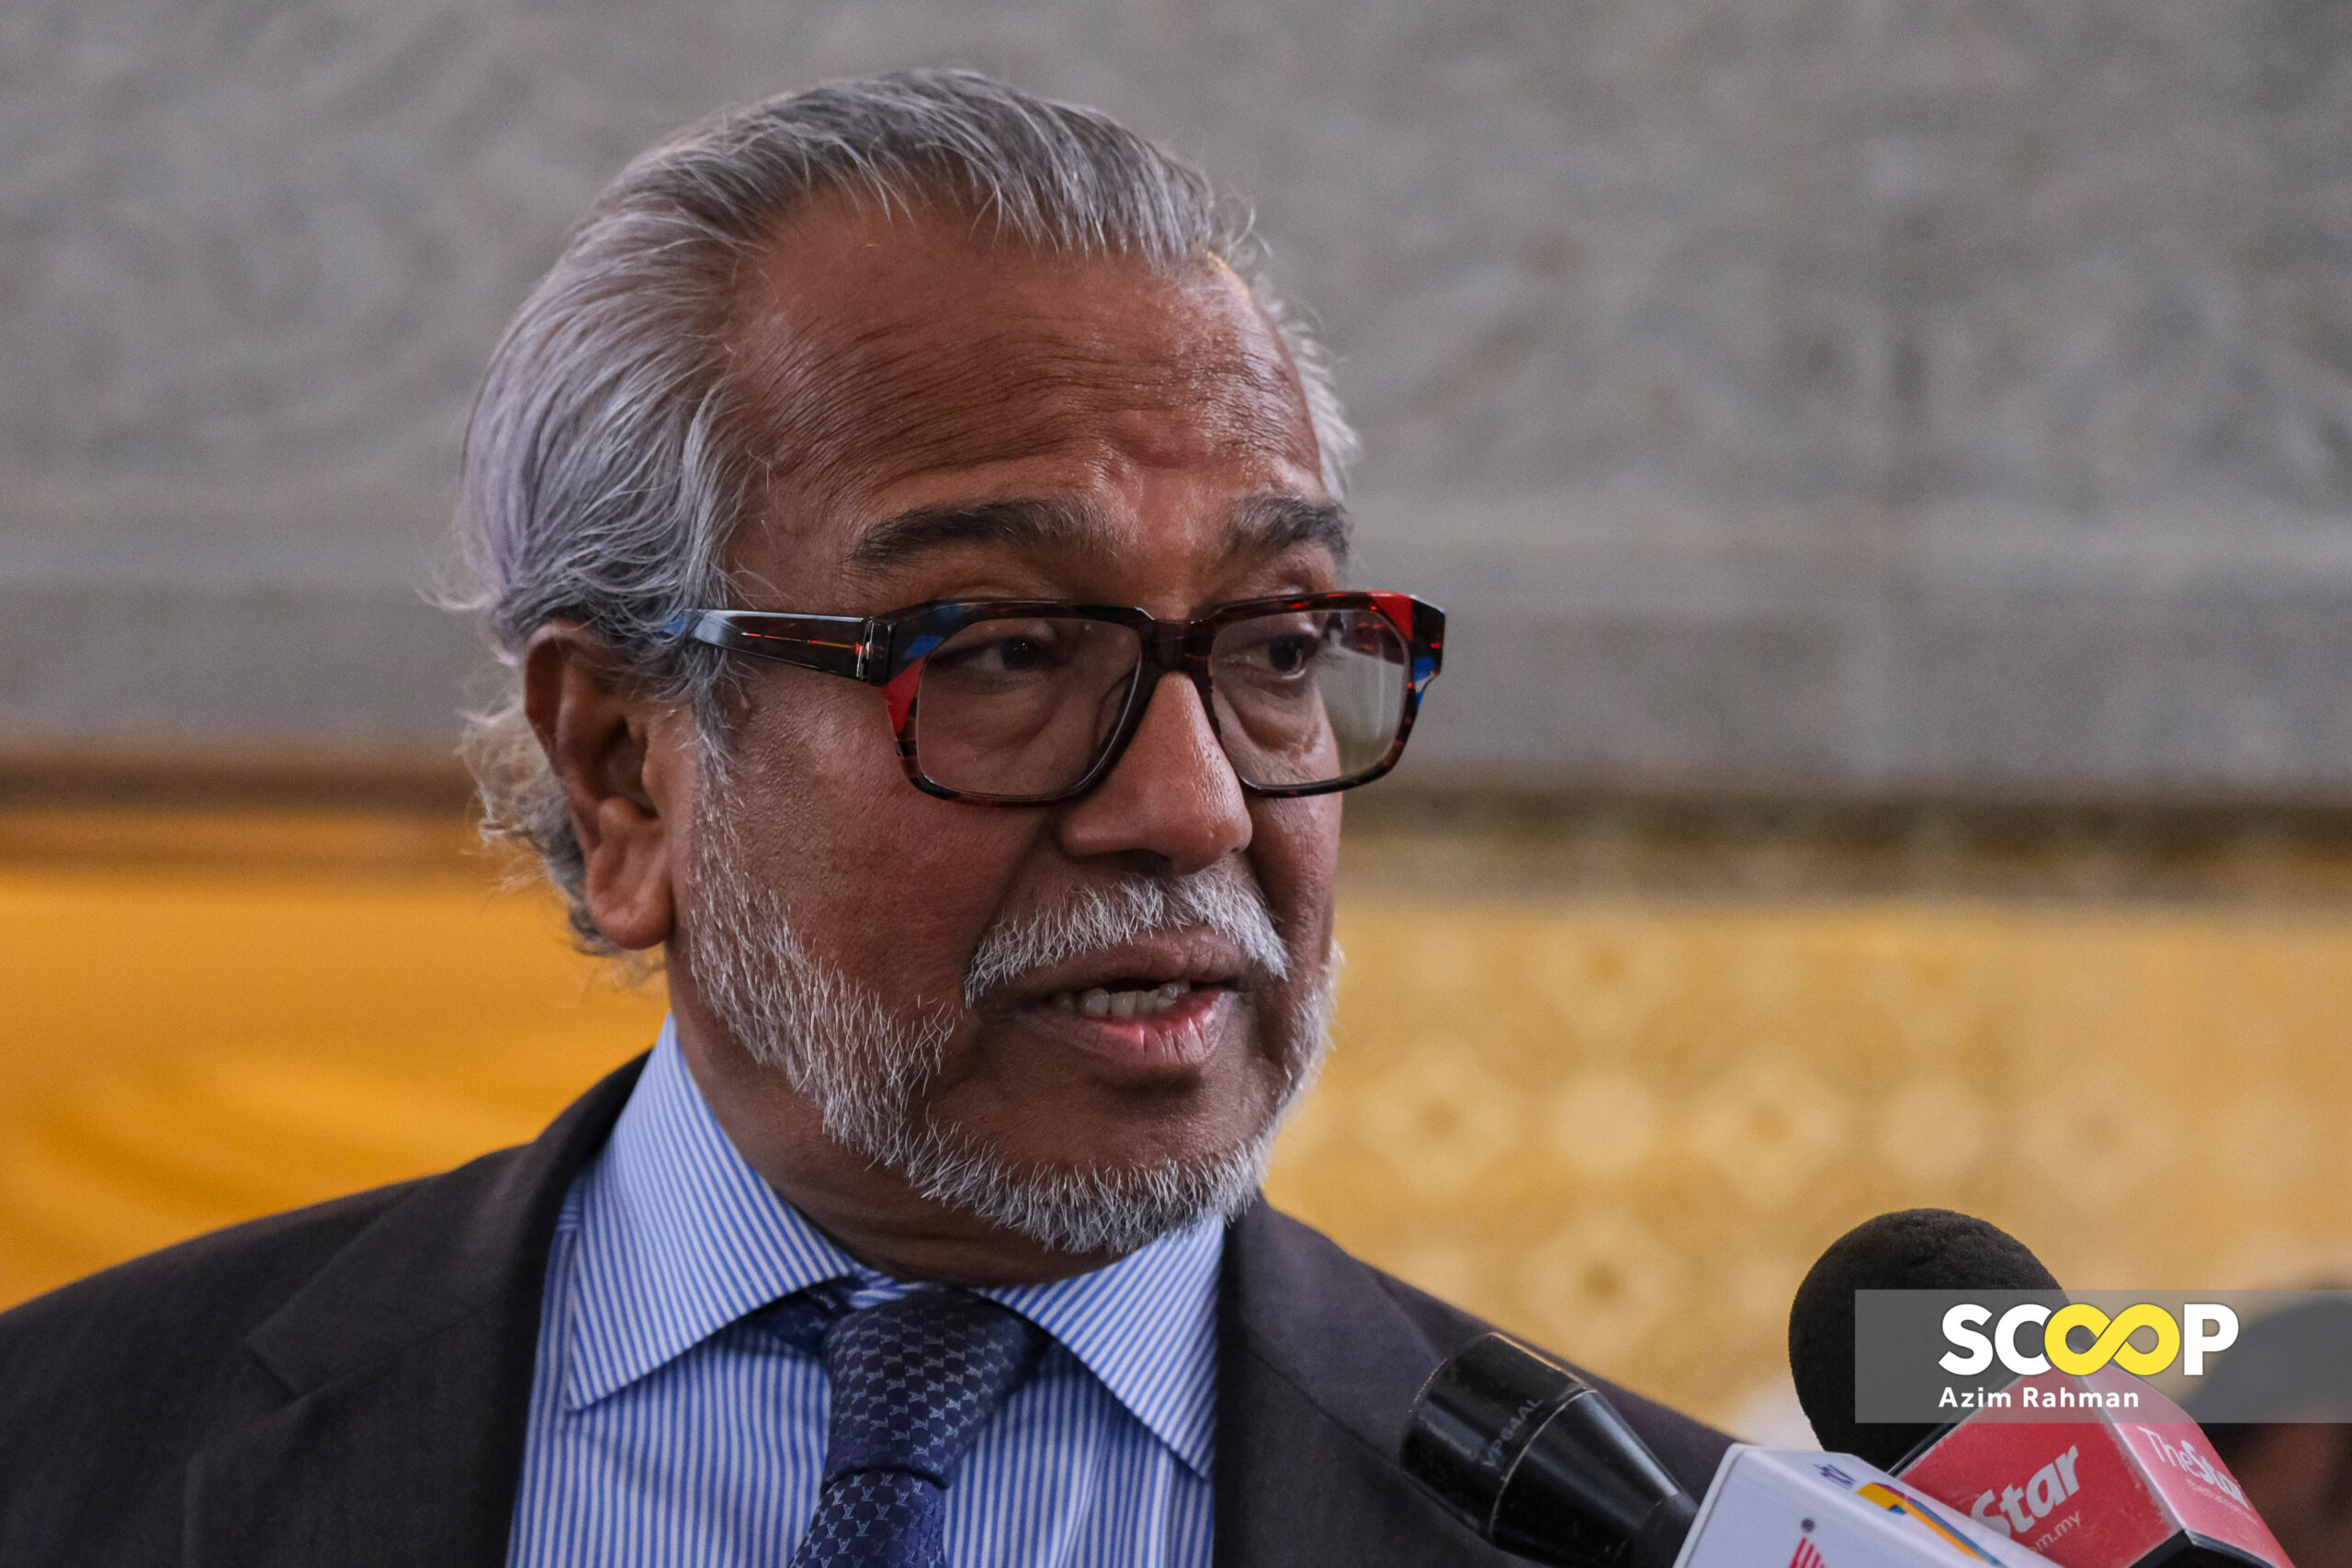 [UPDATED] AGC withdraws appeal against Shafee’s acquittal over money laundering charges